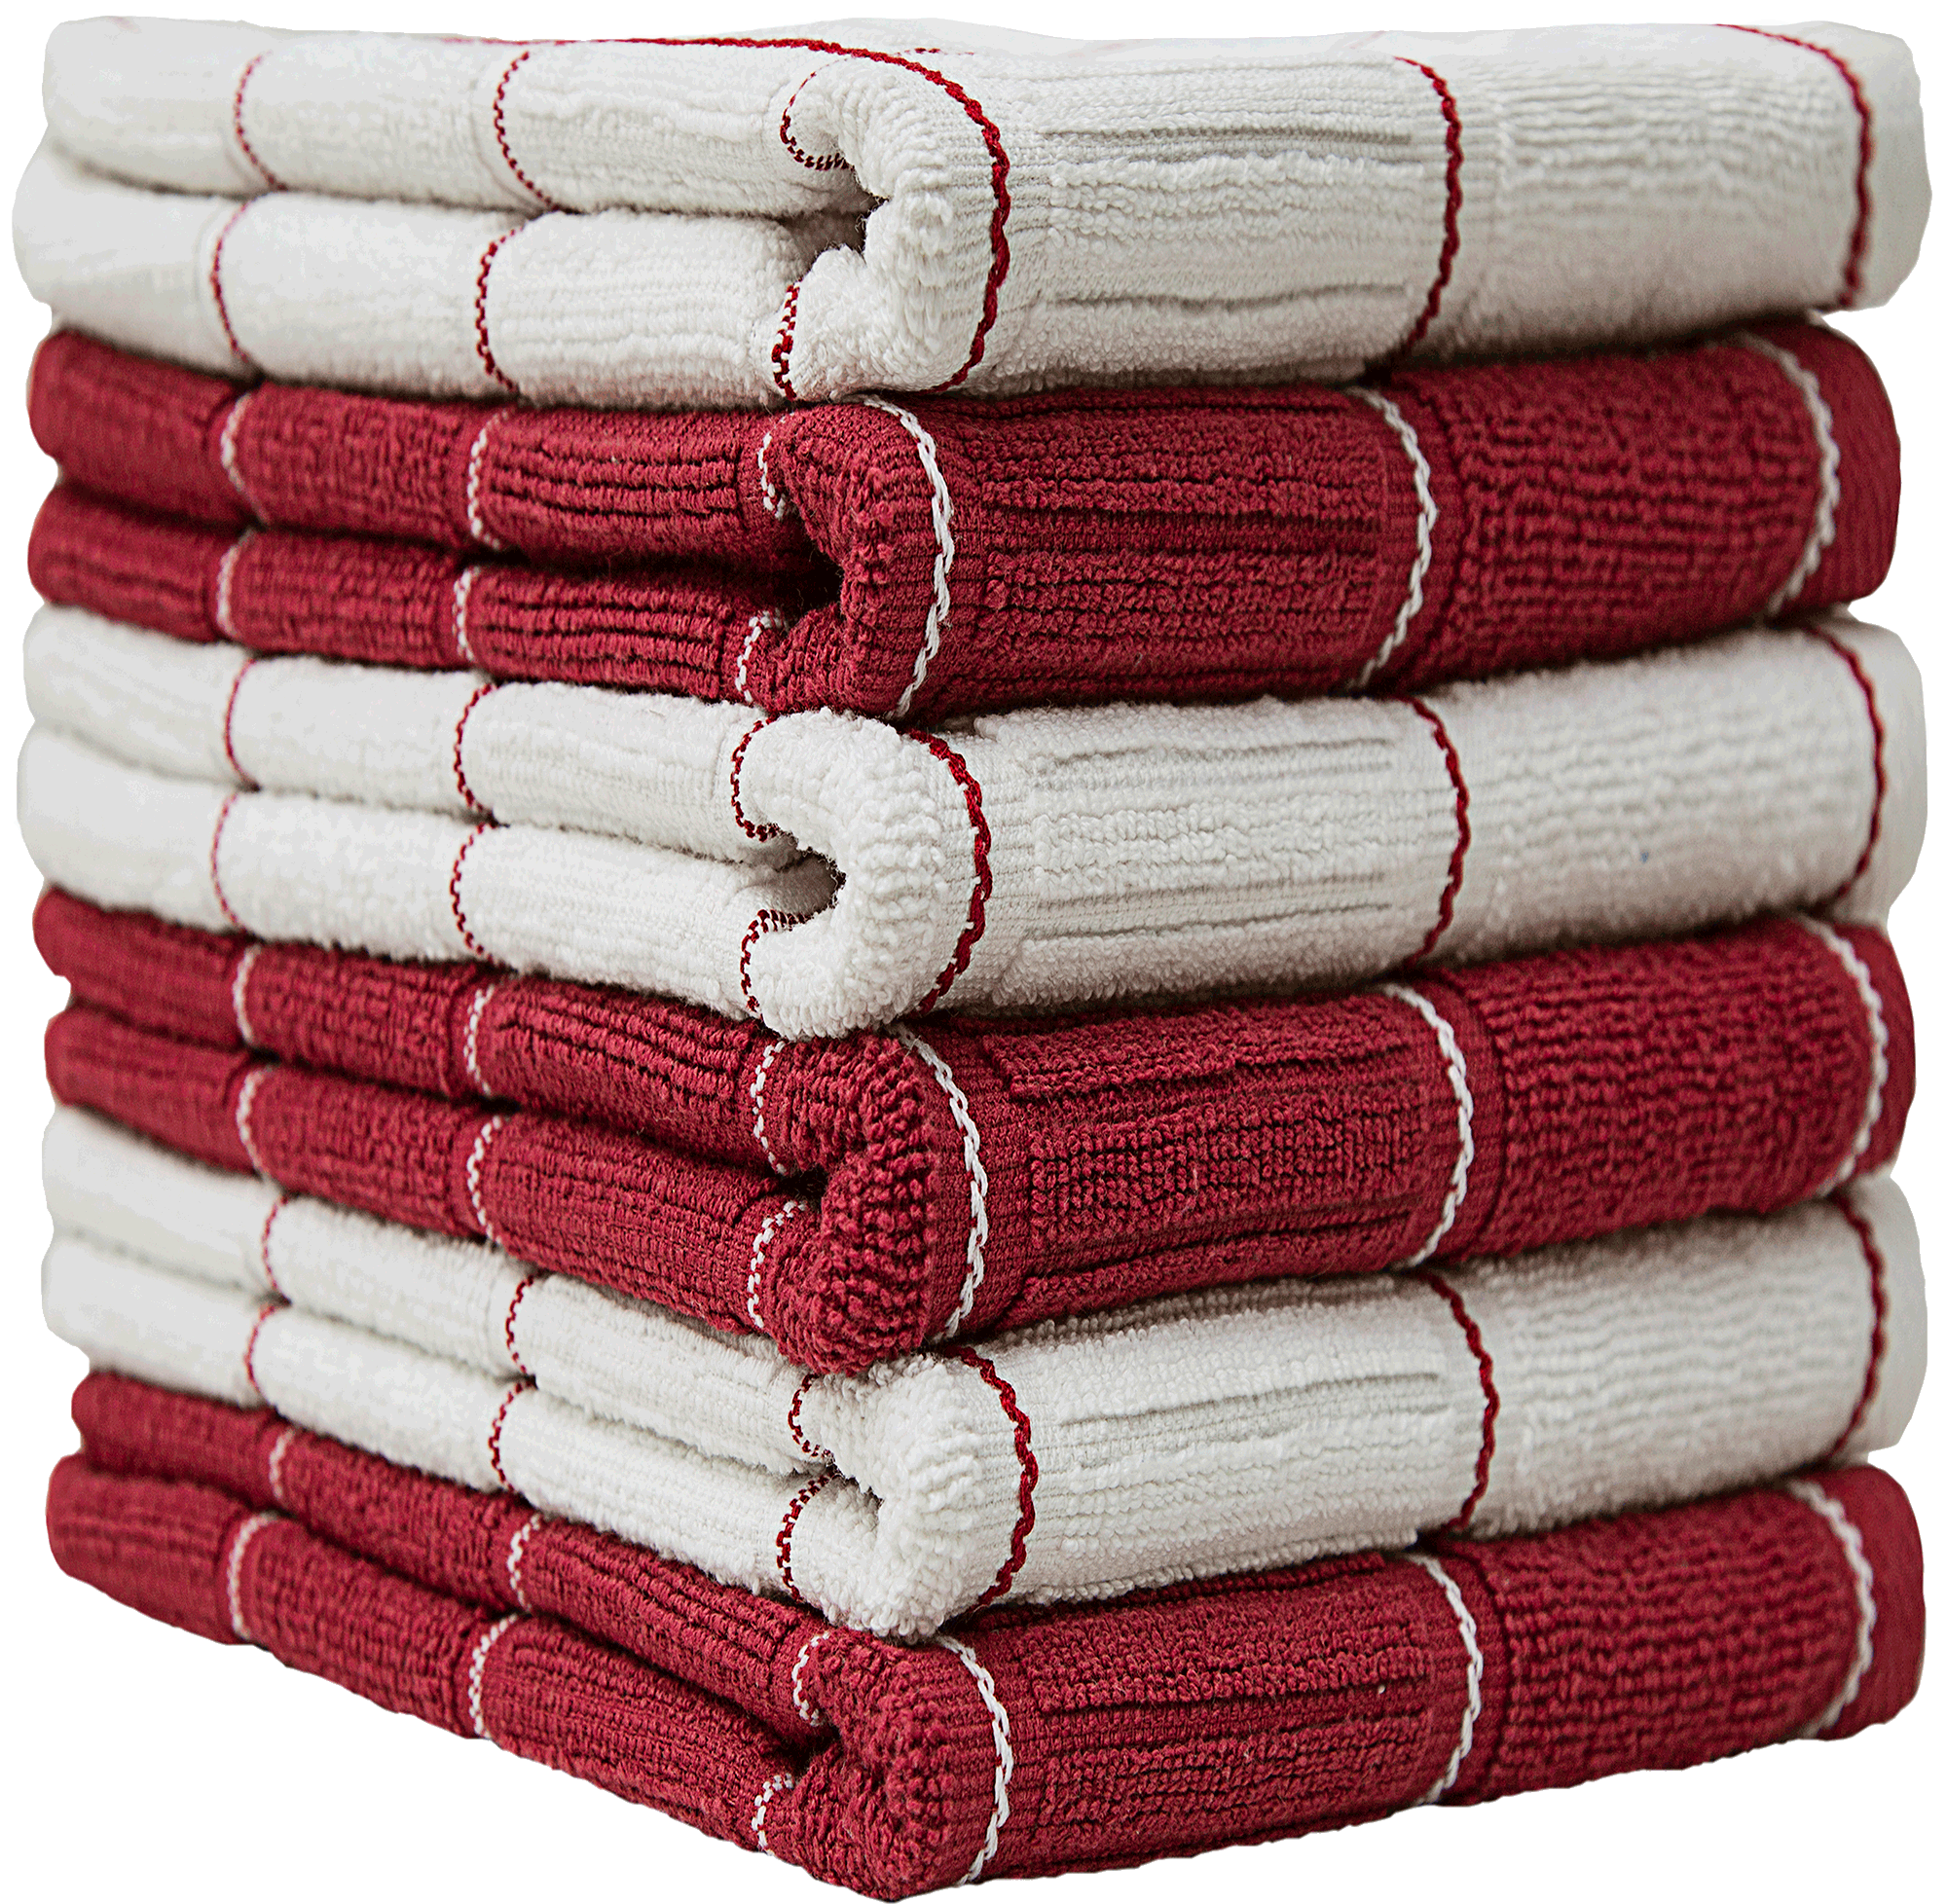  Quteprint Kitchen Dish Towels 6 Pack, Red Snowflakes